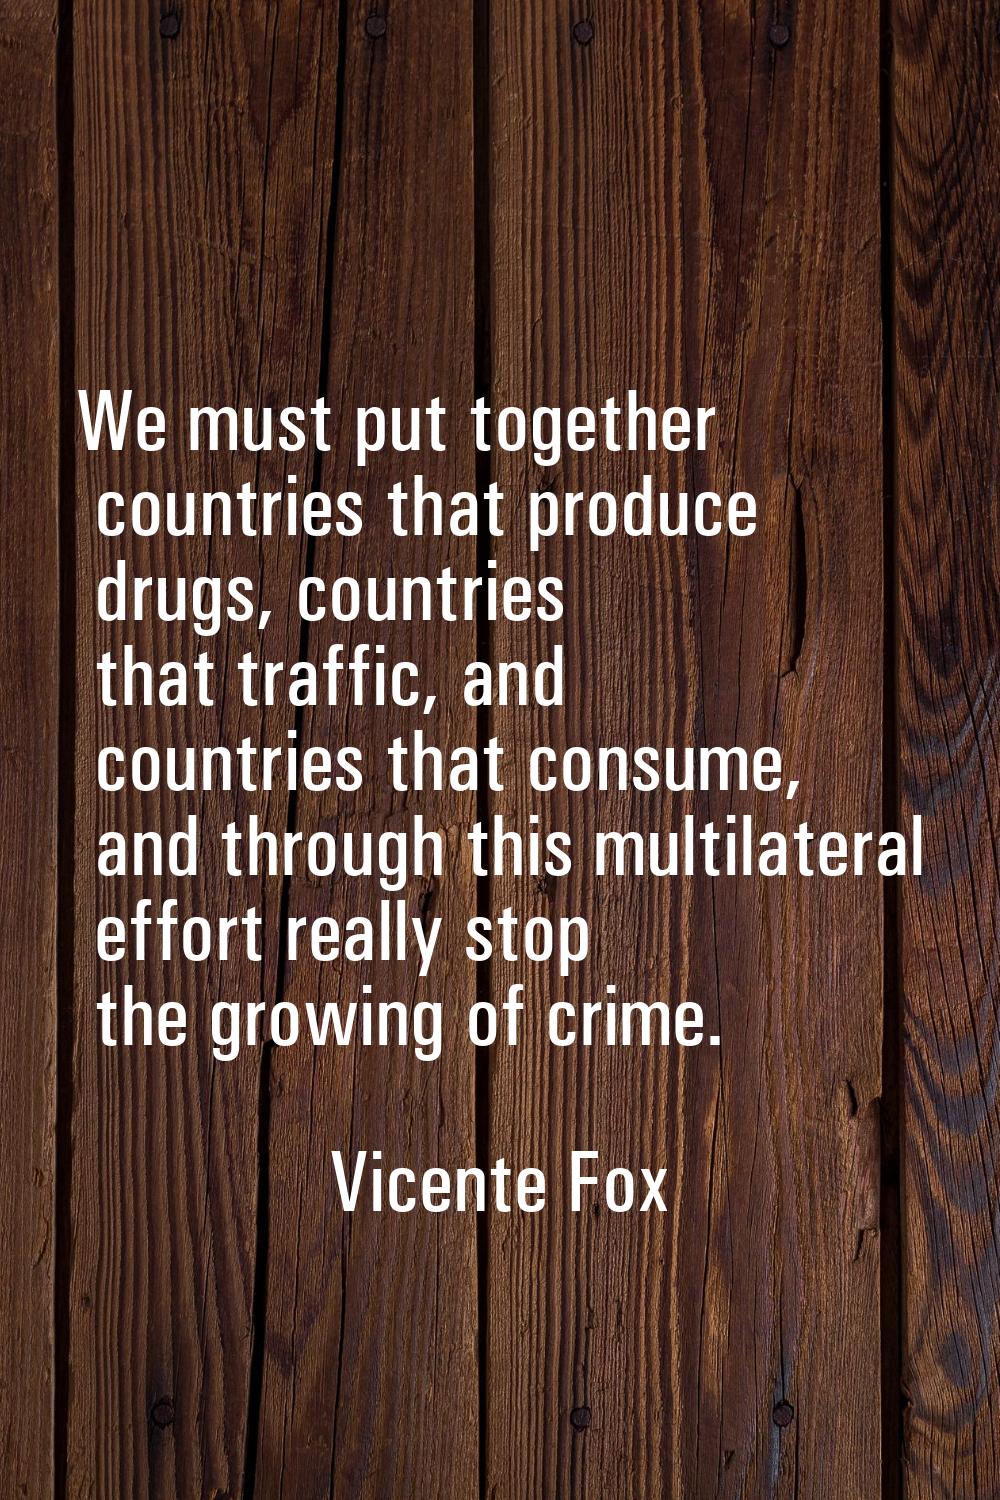 We must put together countries that produce drugs, countries that traffic, and countries that consu